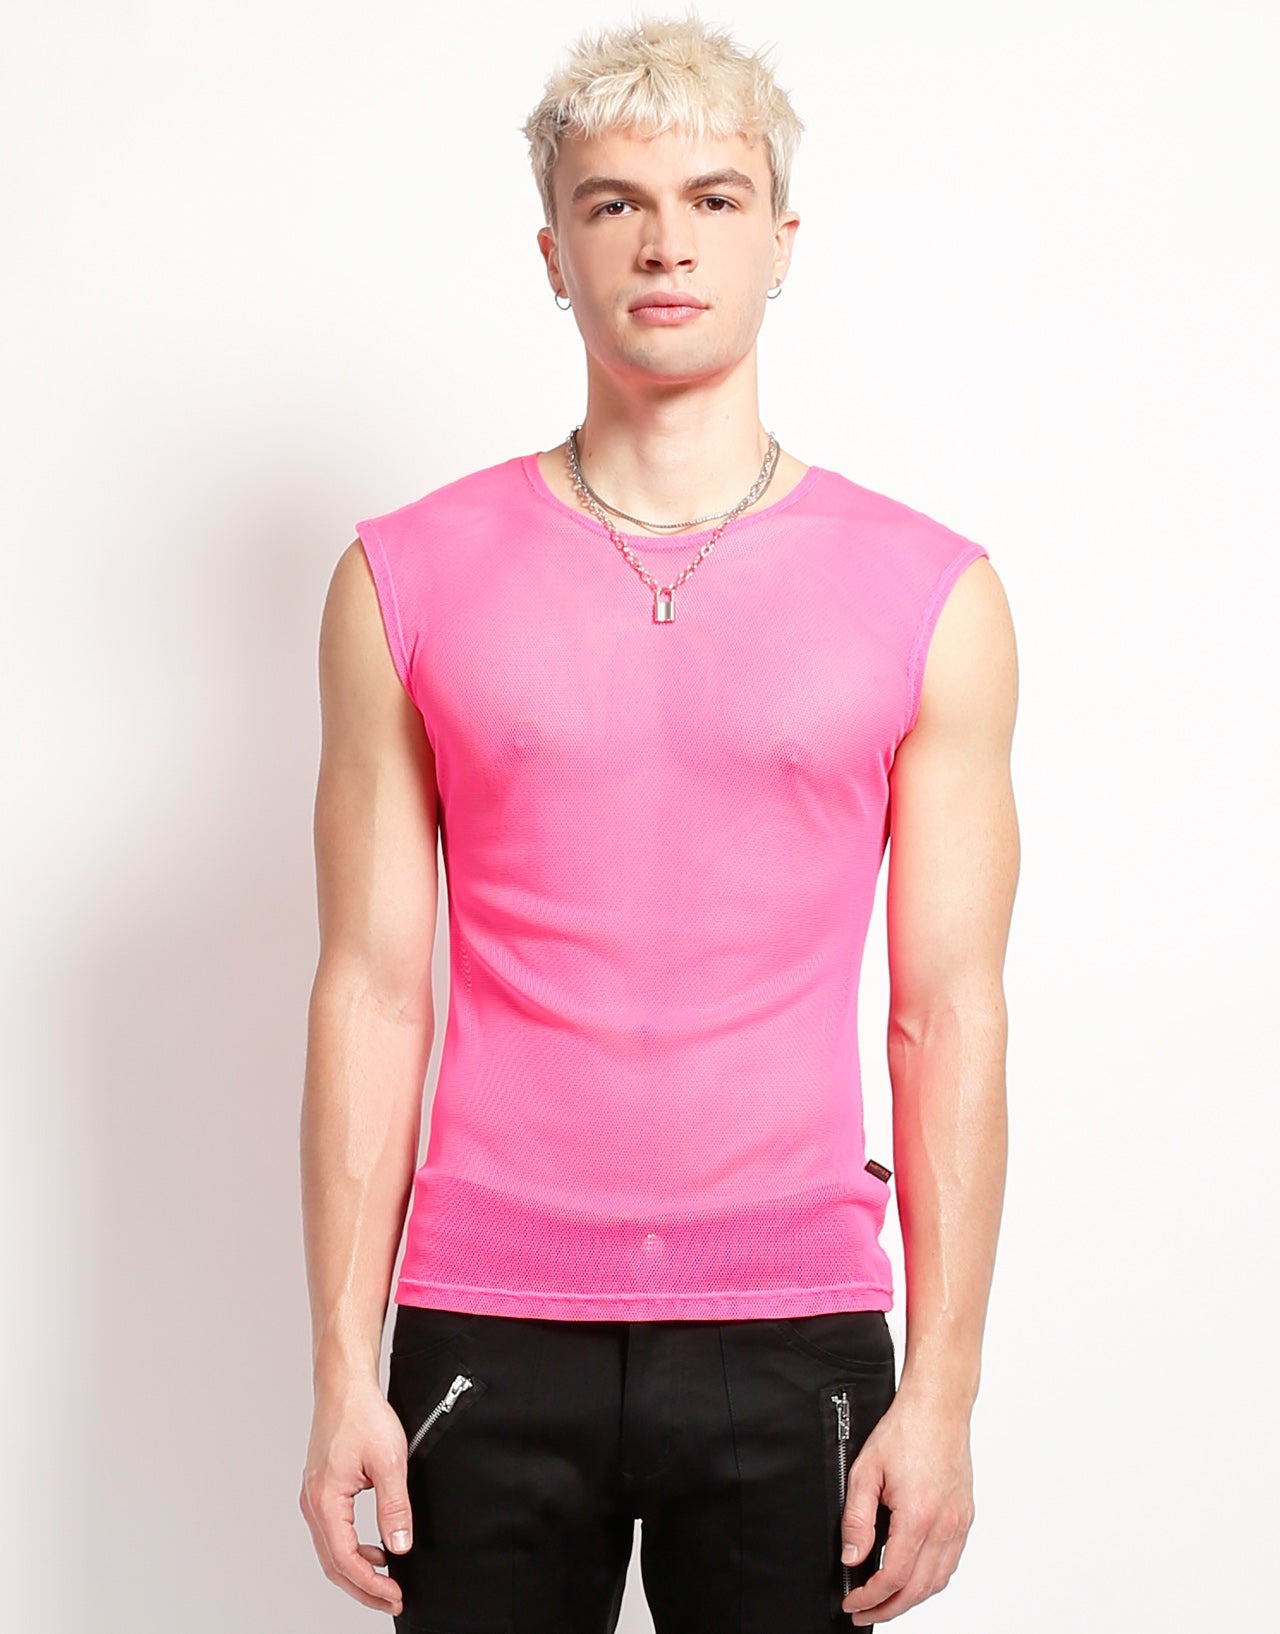 The pink Sleeveless Fishnet Muscle Tank on a model wearing black pants, front view.